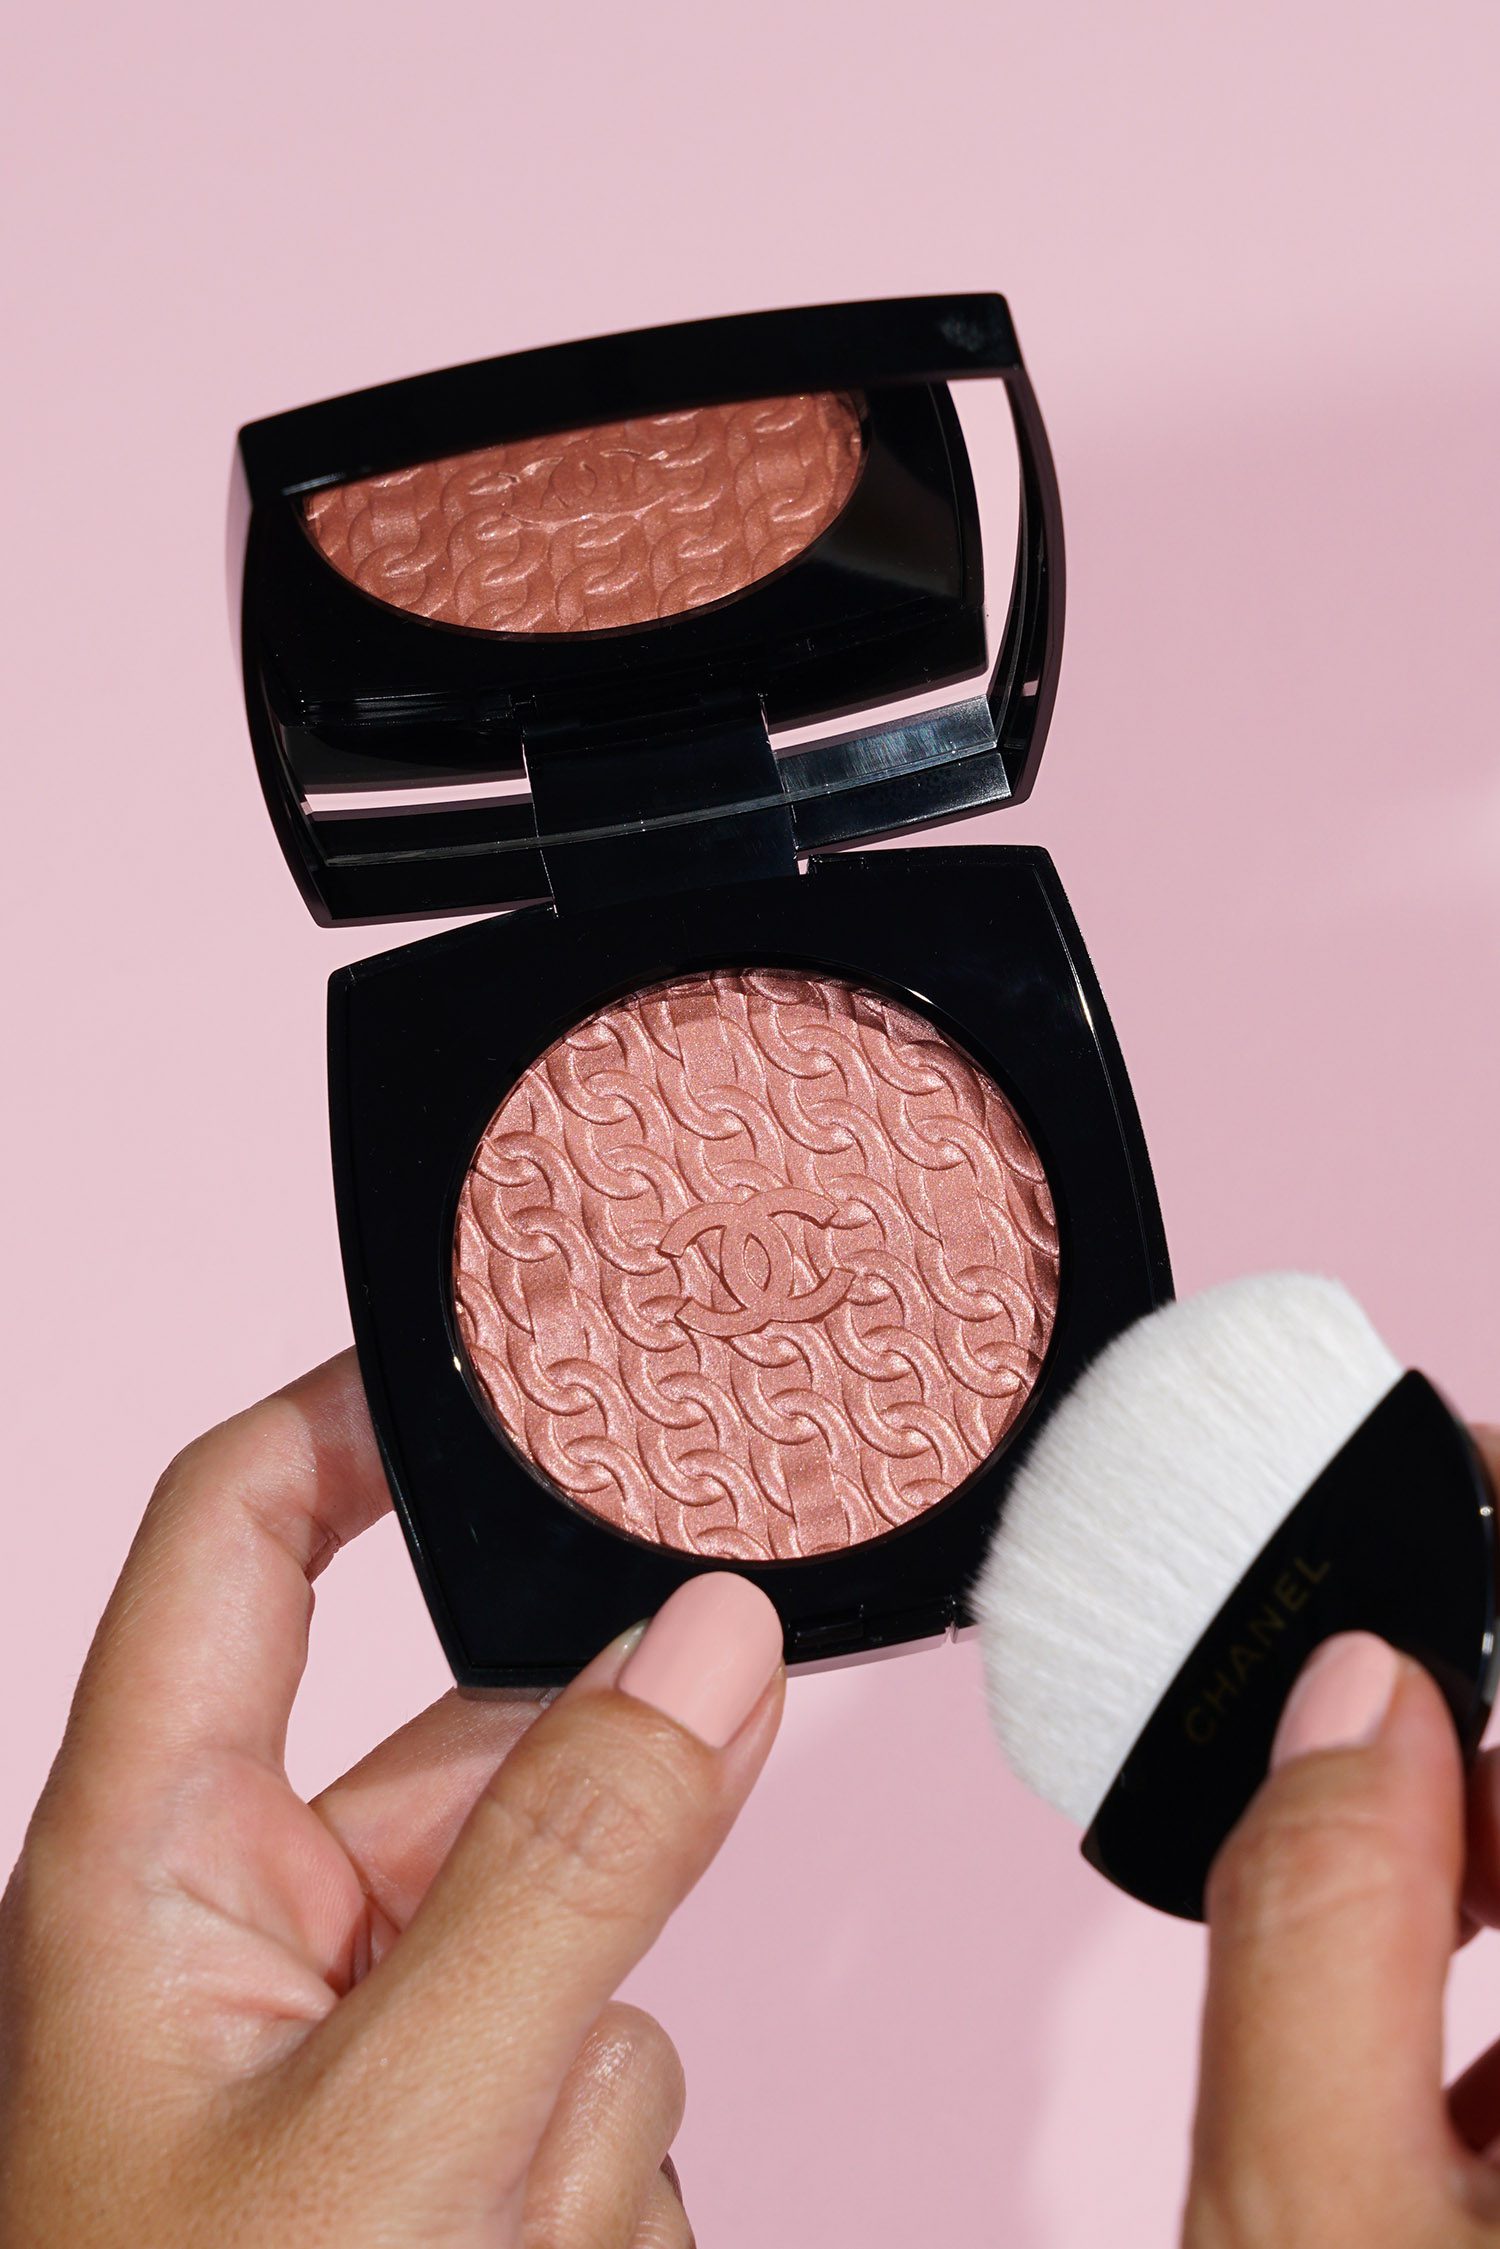 Chanel Les Chaines de Chanel Illuminating Blush Powder Review & Swatches